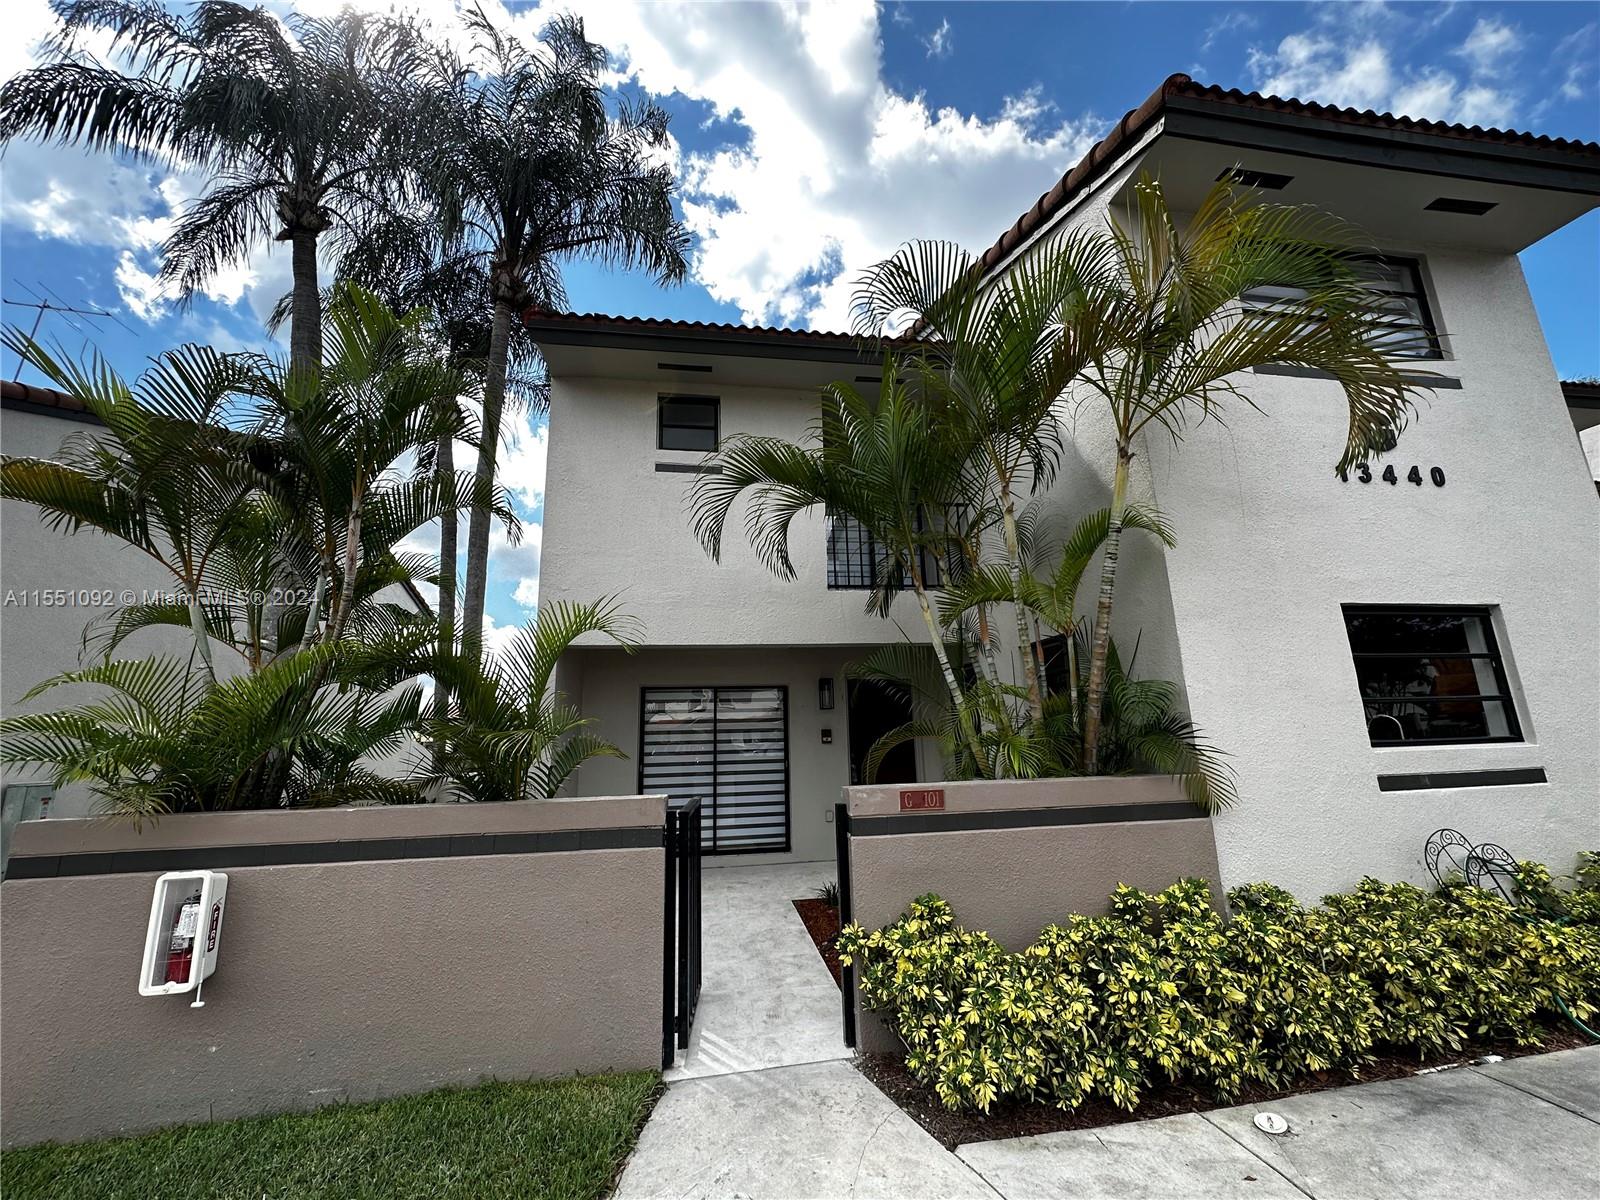 13440 SW 62nd St #G101 For Sale A11551092, FL